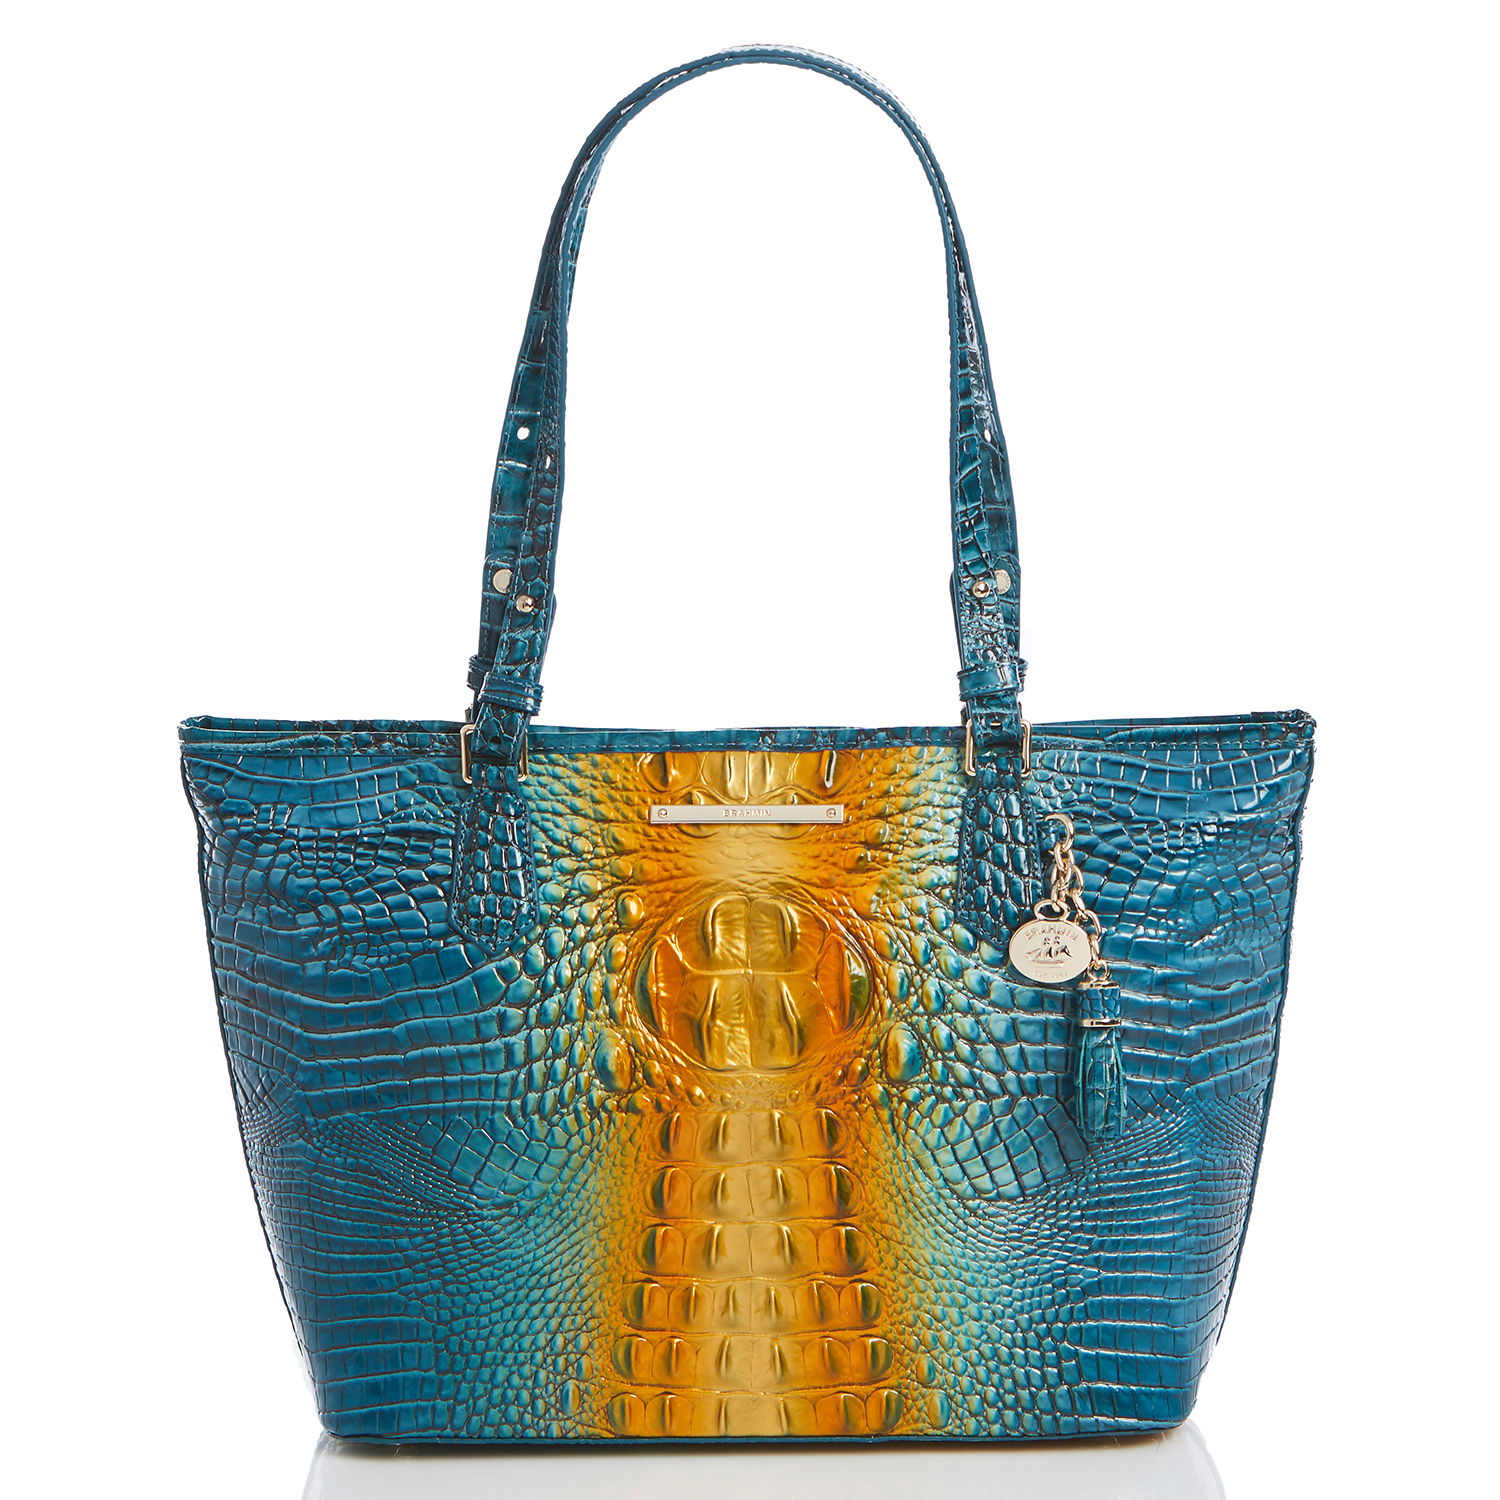 Brahmin Handbags - Outlet Event ends TONIGHT. Scoop up your favorites  before it's too late